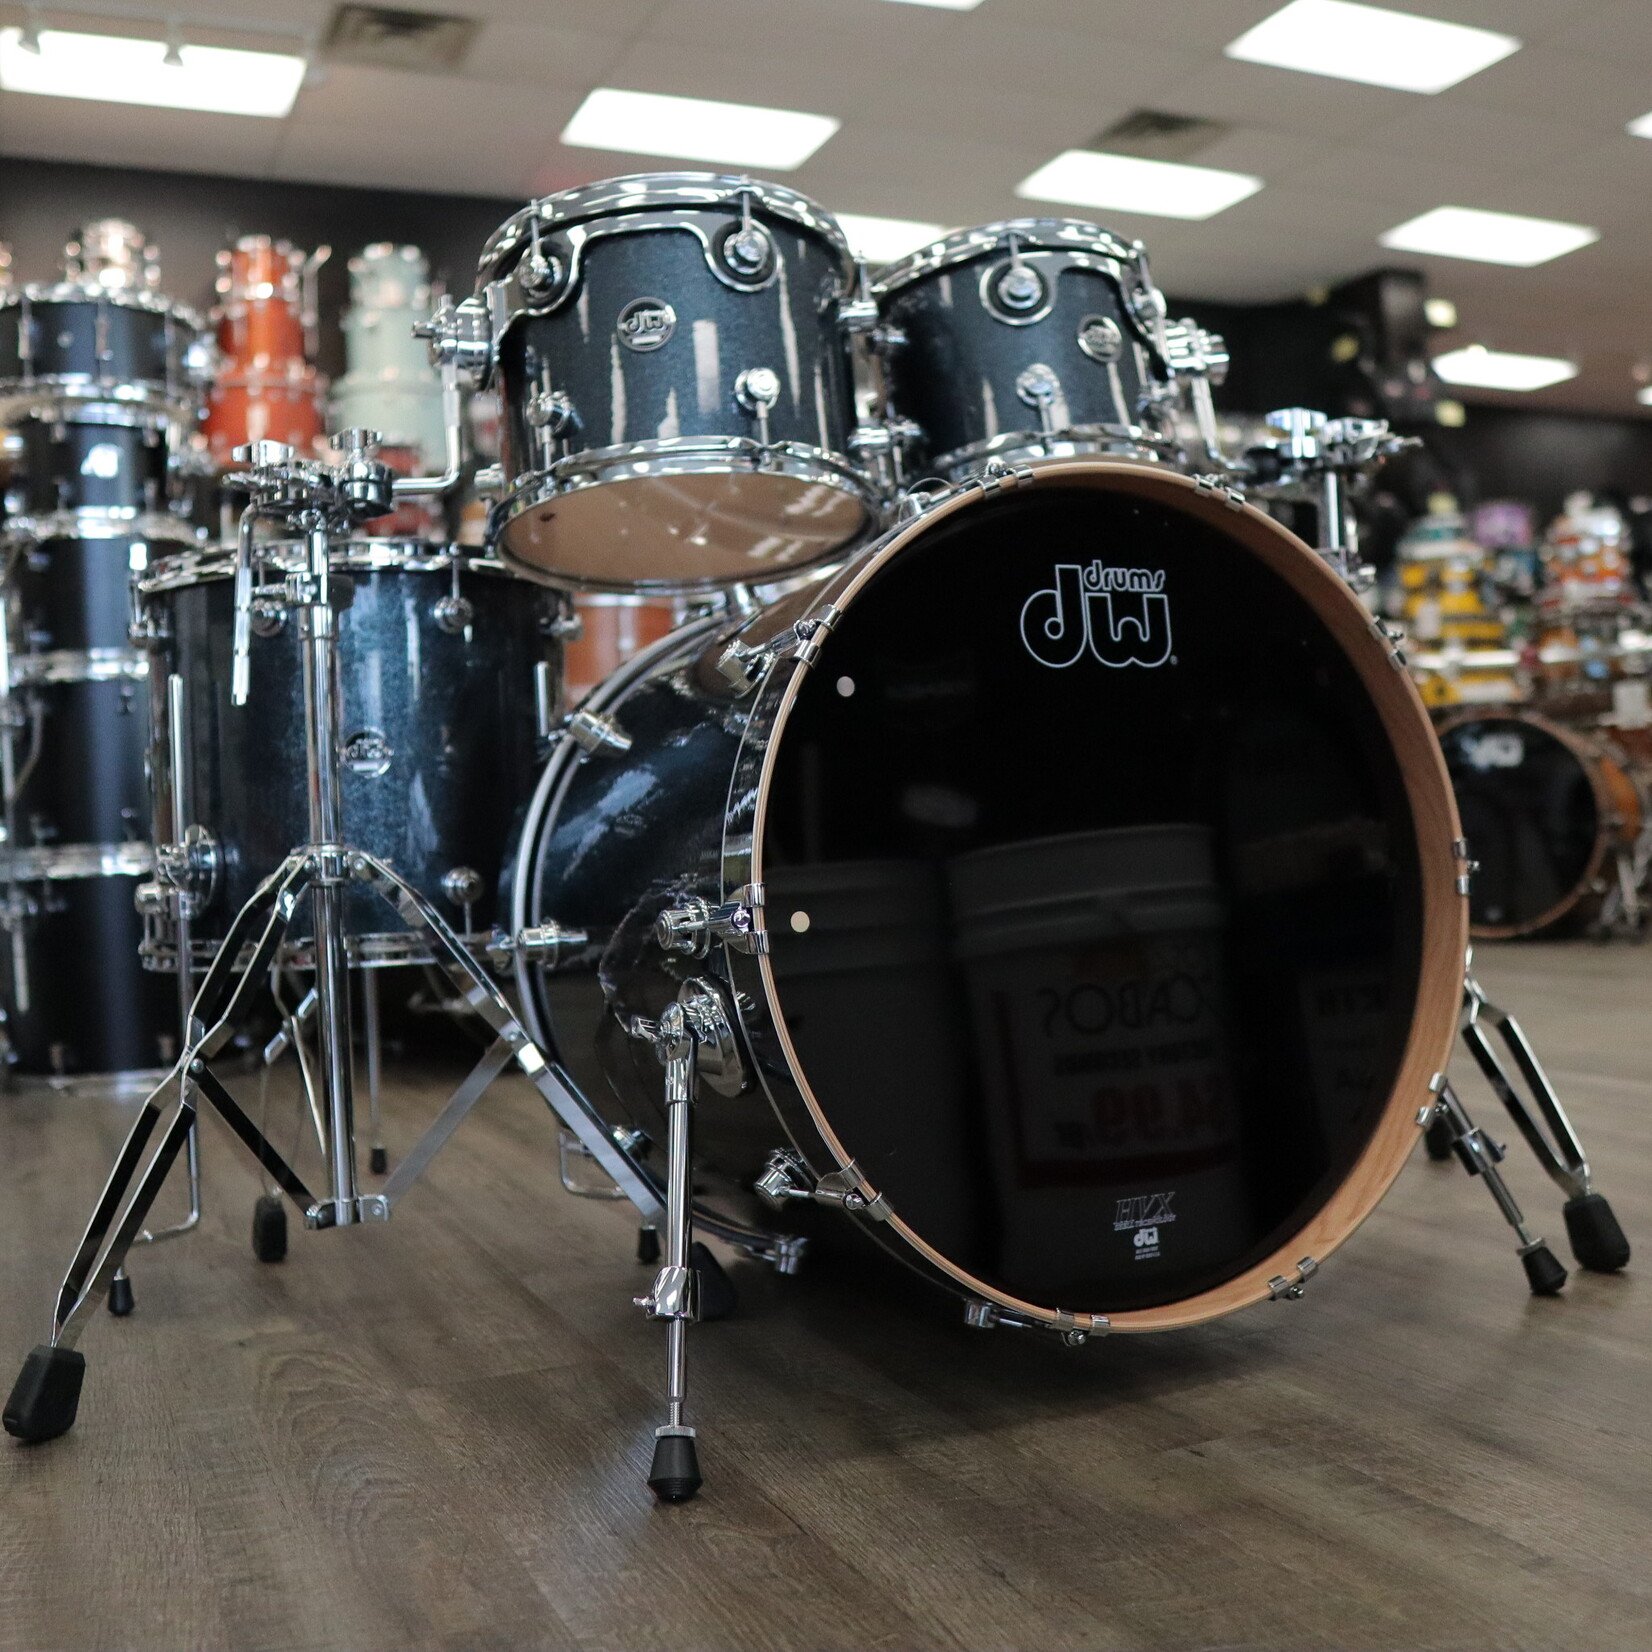 DW DW "Limited Edition" Performance Series 4-Piece Cherry Shell Pack 22/10/12/16 (Black Sparkle)